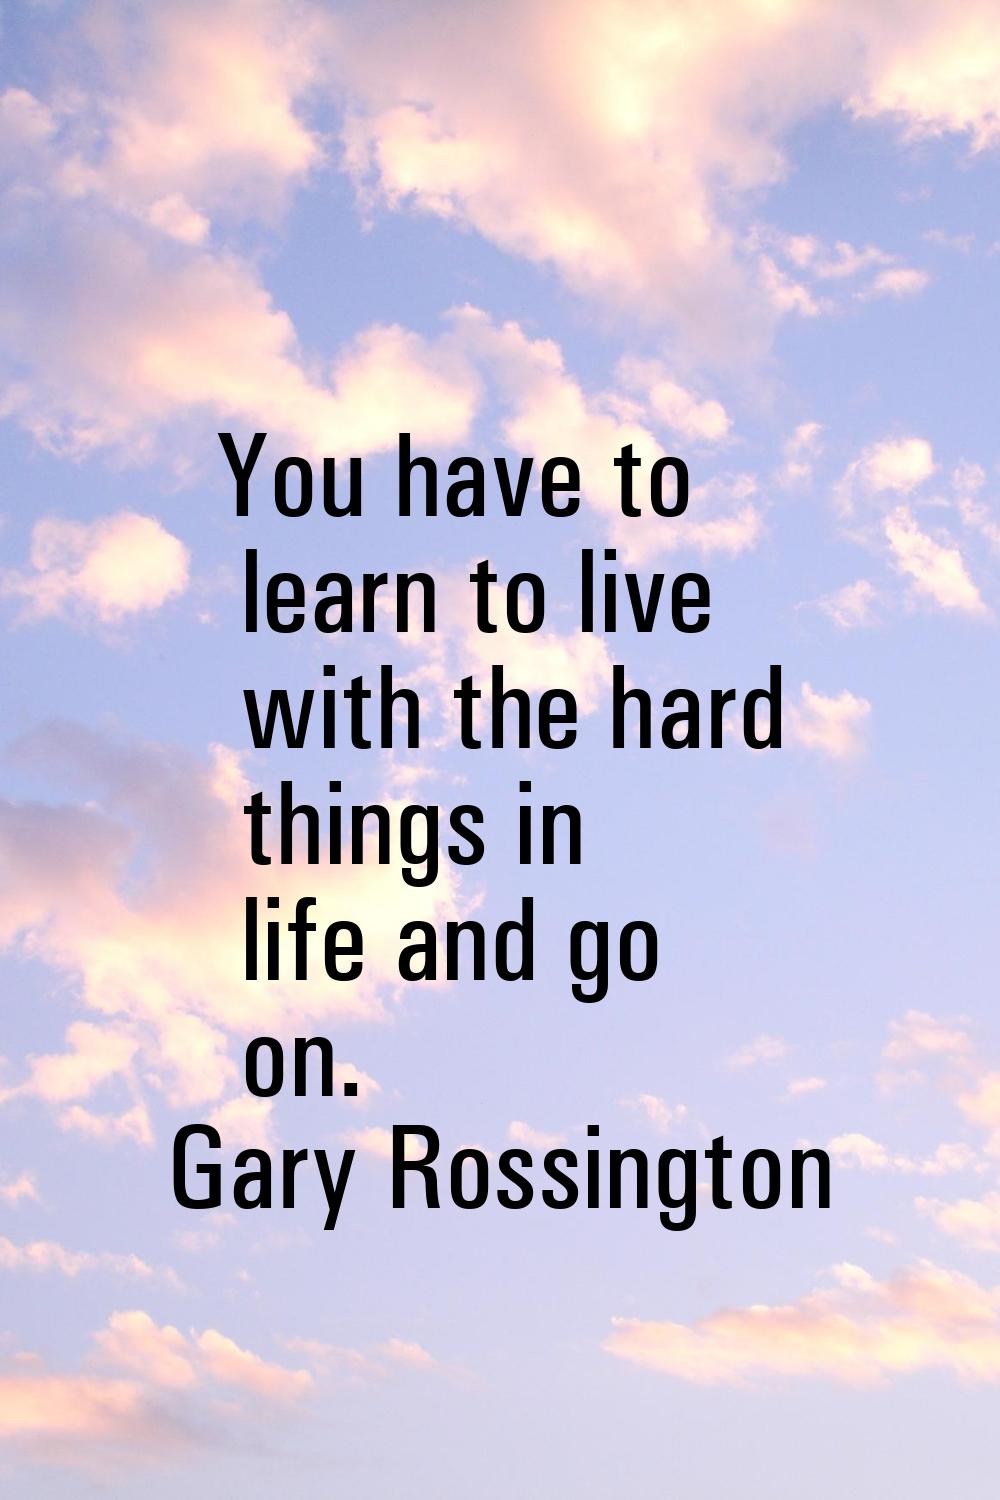 You have to learn to live with the hard things in life and go on.